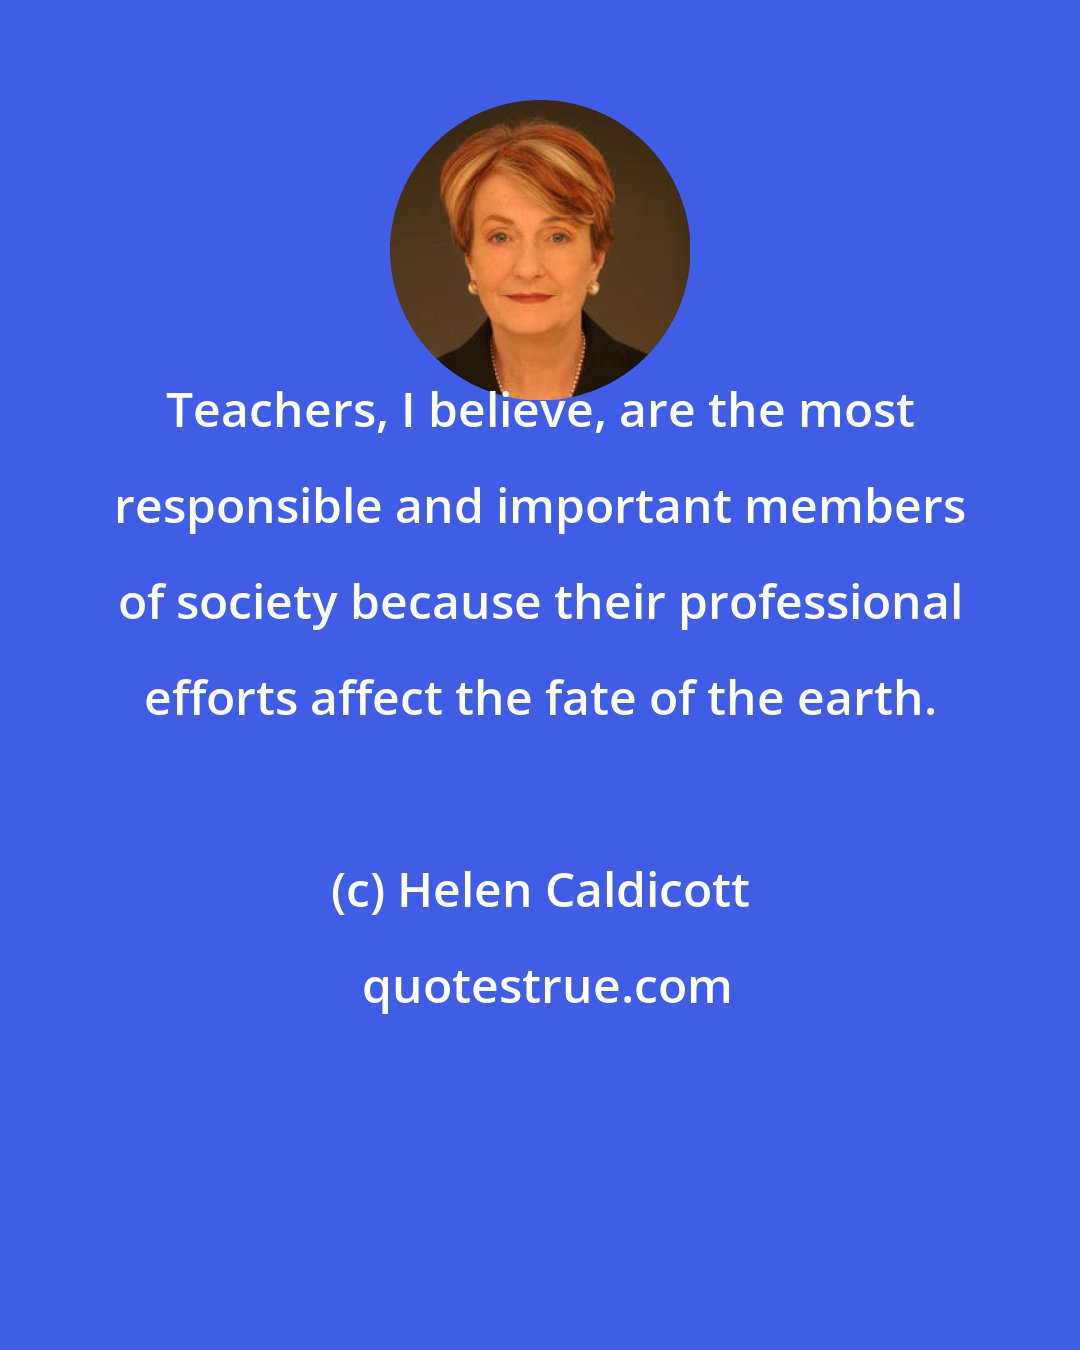 Helen Caldicott: Teachers, I believe, are the most responsible and important members of society because their professional efforts affect the fate of the earth.